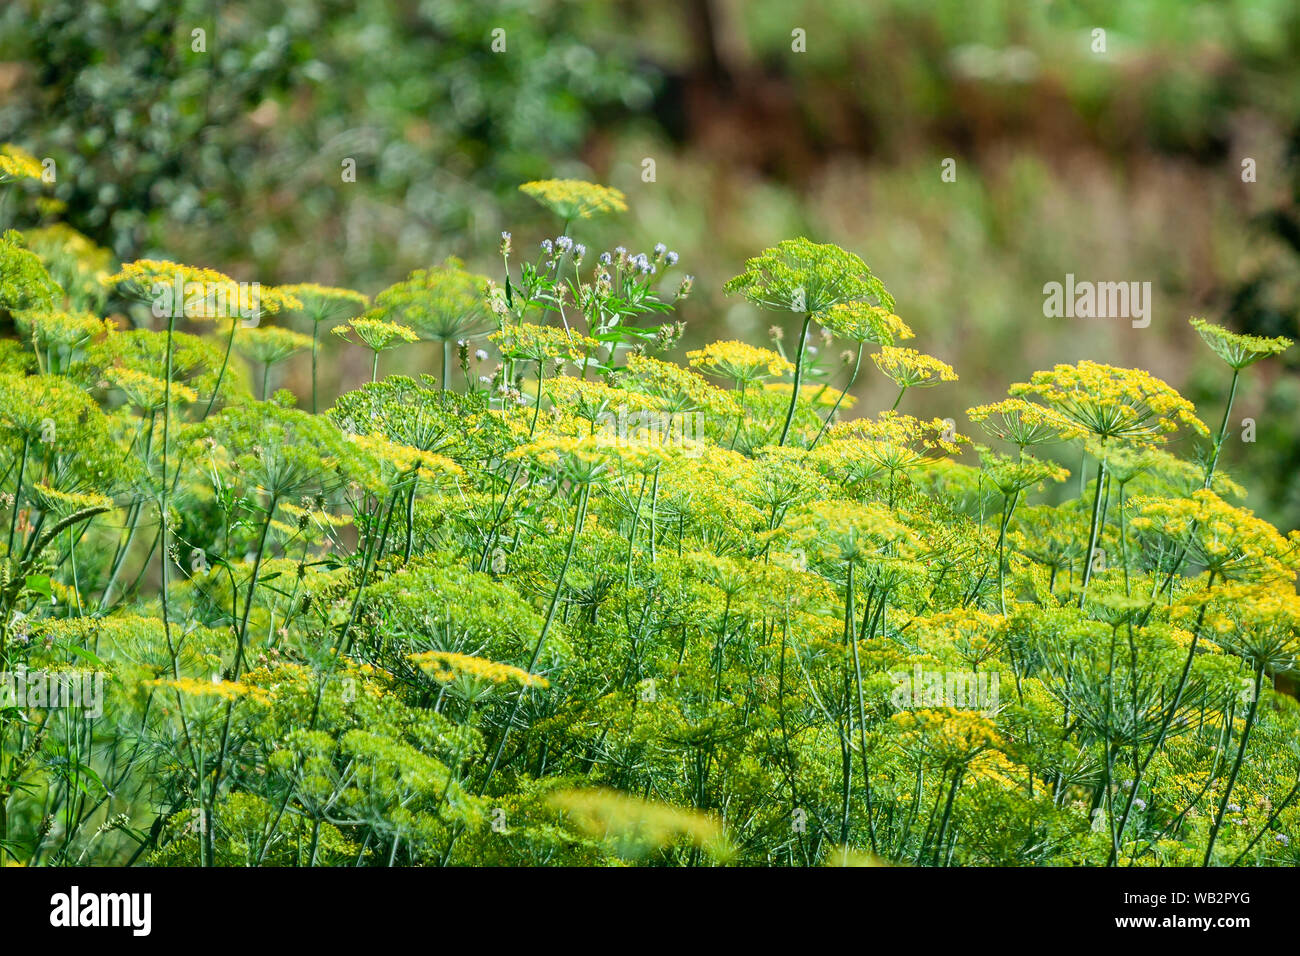 Download Yellow Coriander Flowers In The Vegetable Garden Greenary Stock Photo Alamy Yellowimages Mockups